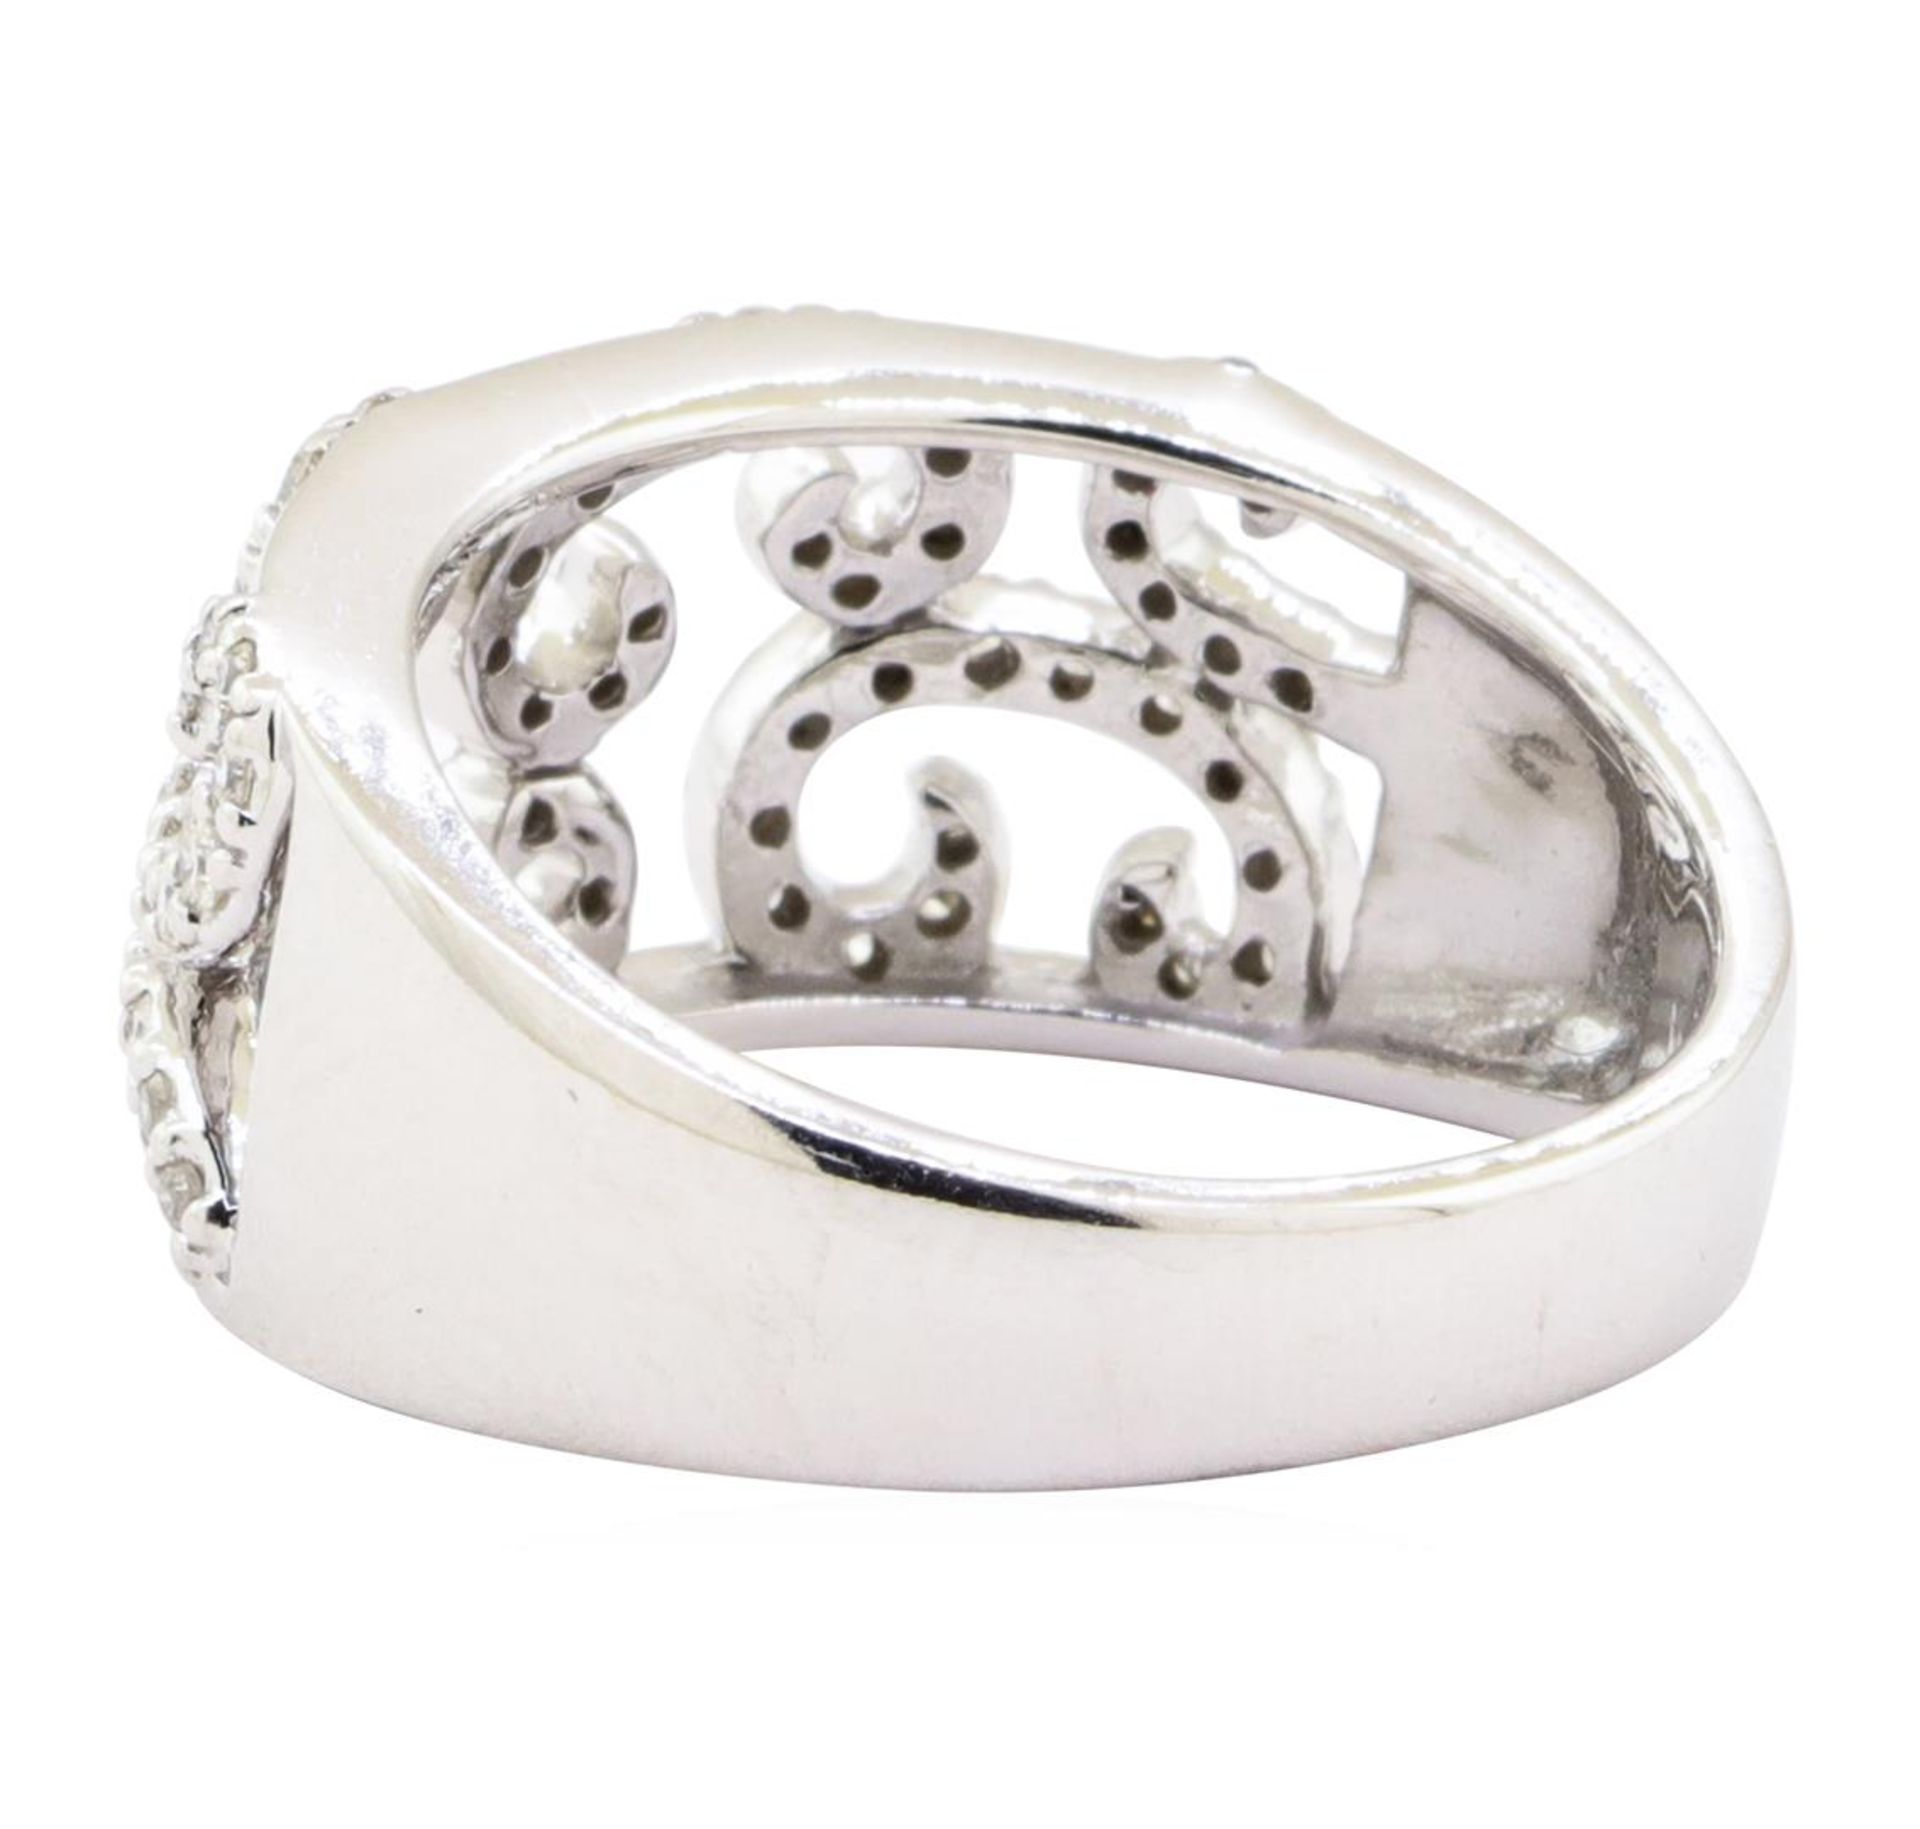 0.58ctw Diamond Half-Dome Band - 14KT White Gold - Image 3 of 4